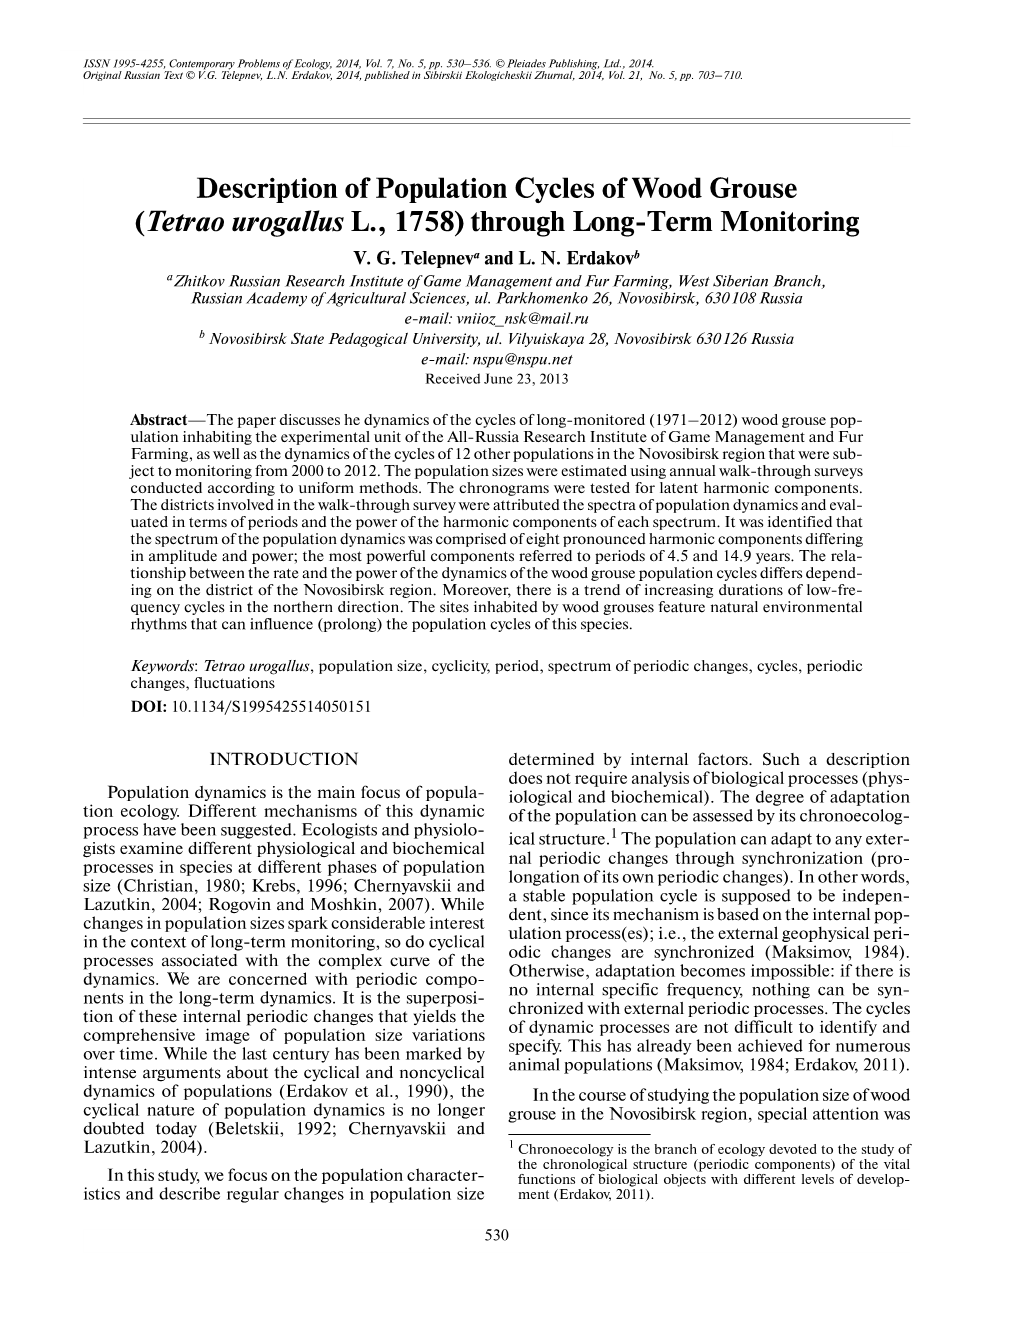 Description of Population Cycles of Wood Grouse (Tetrao Urogallus L., 1758) Through Long�Term Monitoring V